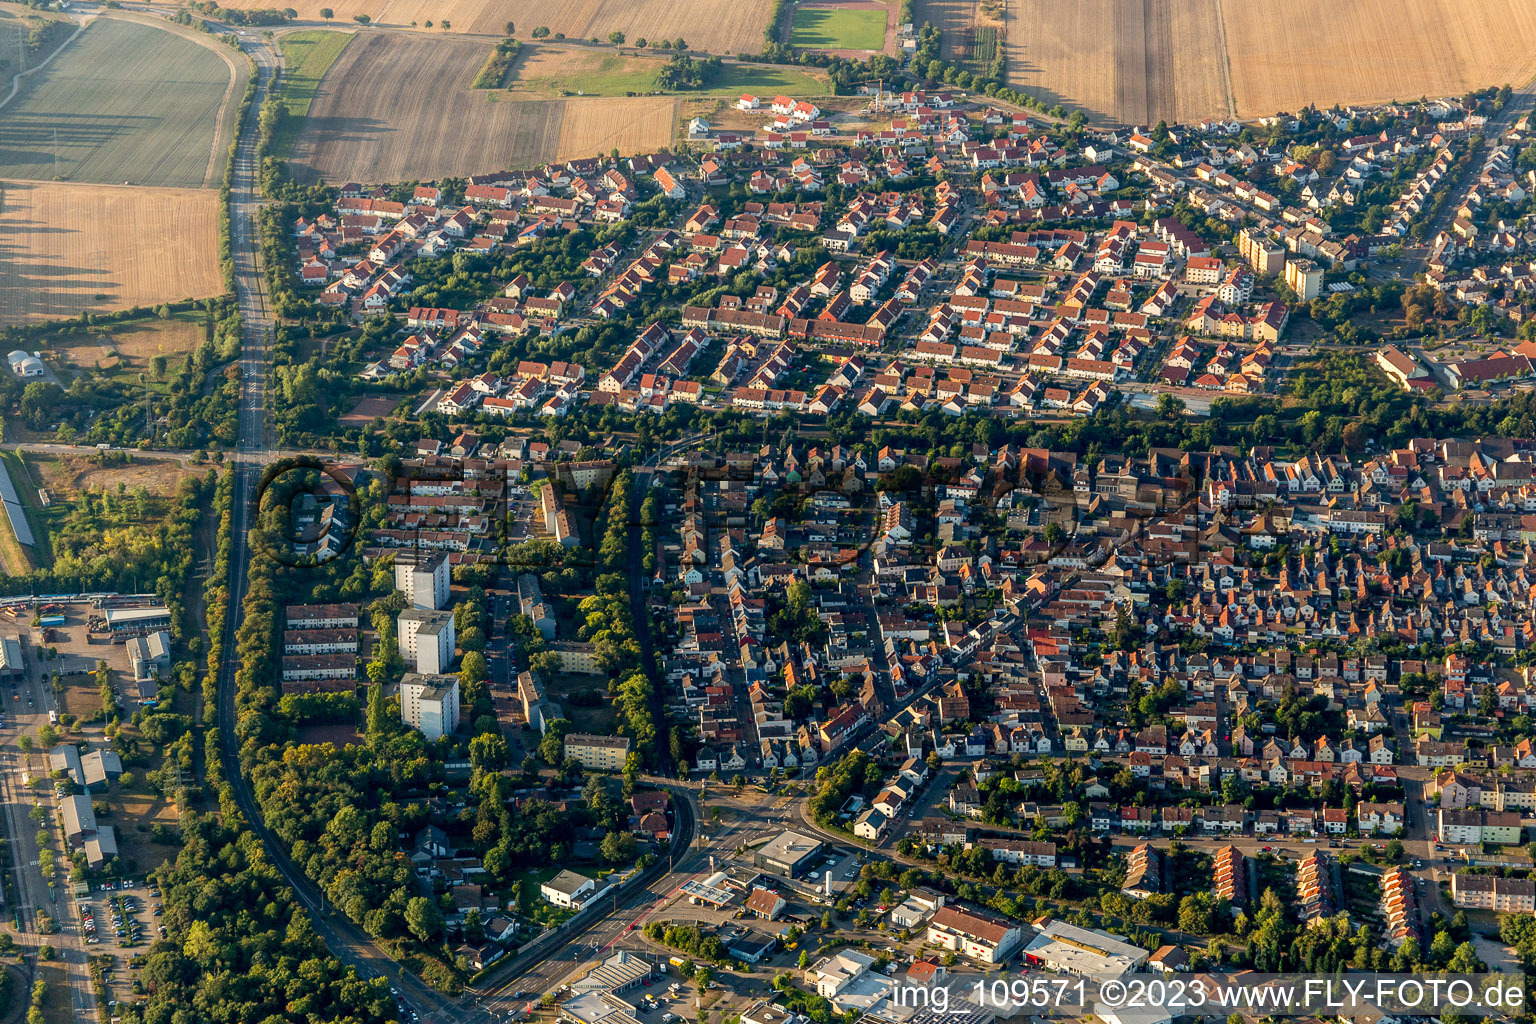 District Gartenstadt in Ludwigshafen am Rhein in the state Rhineland-Palatinate, Germany out of the air